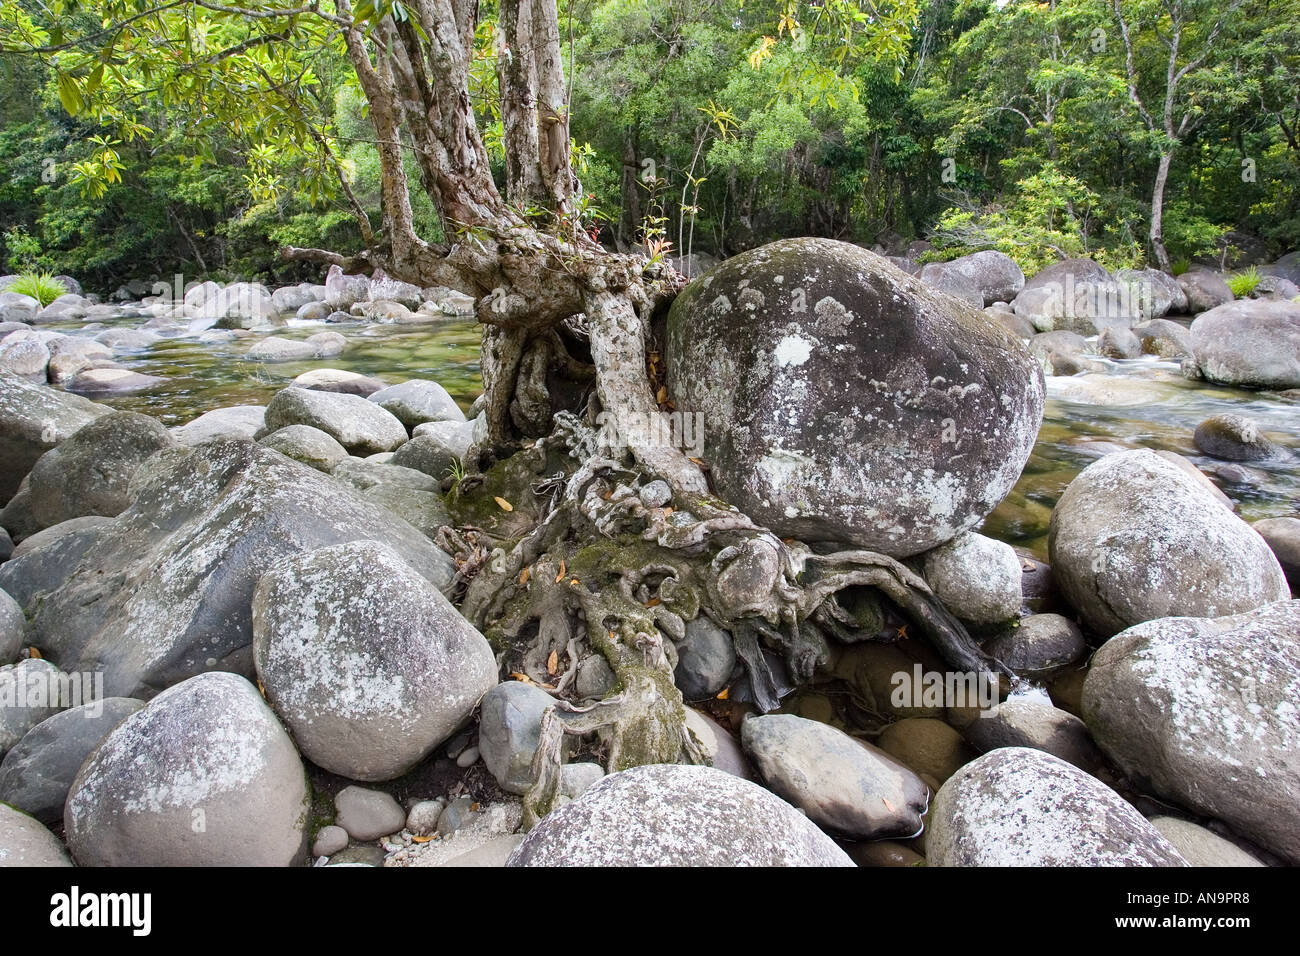 Tree roots growing amongst the boulders of the Mossman riverbed Daintree Rainforest Queensland Australia Stock Photo